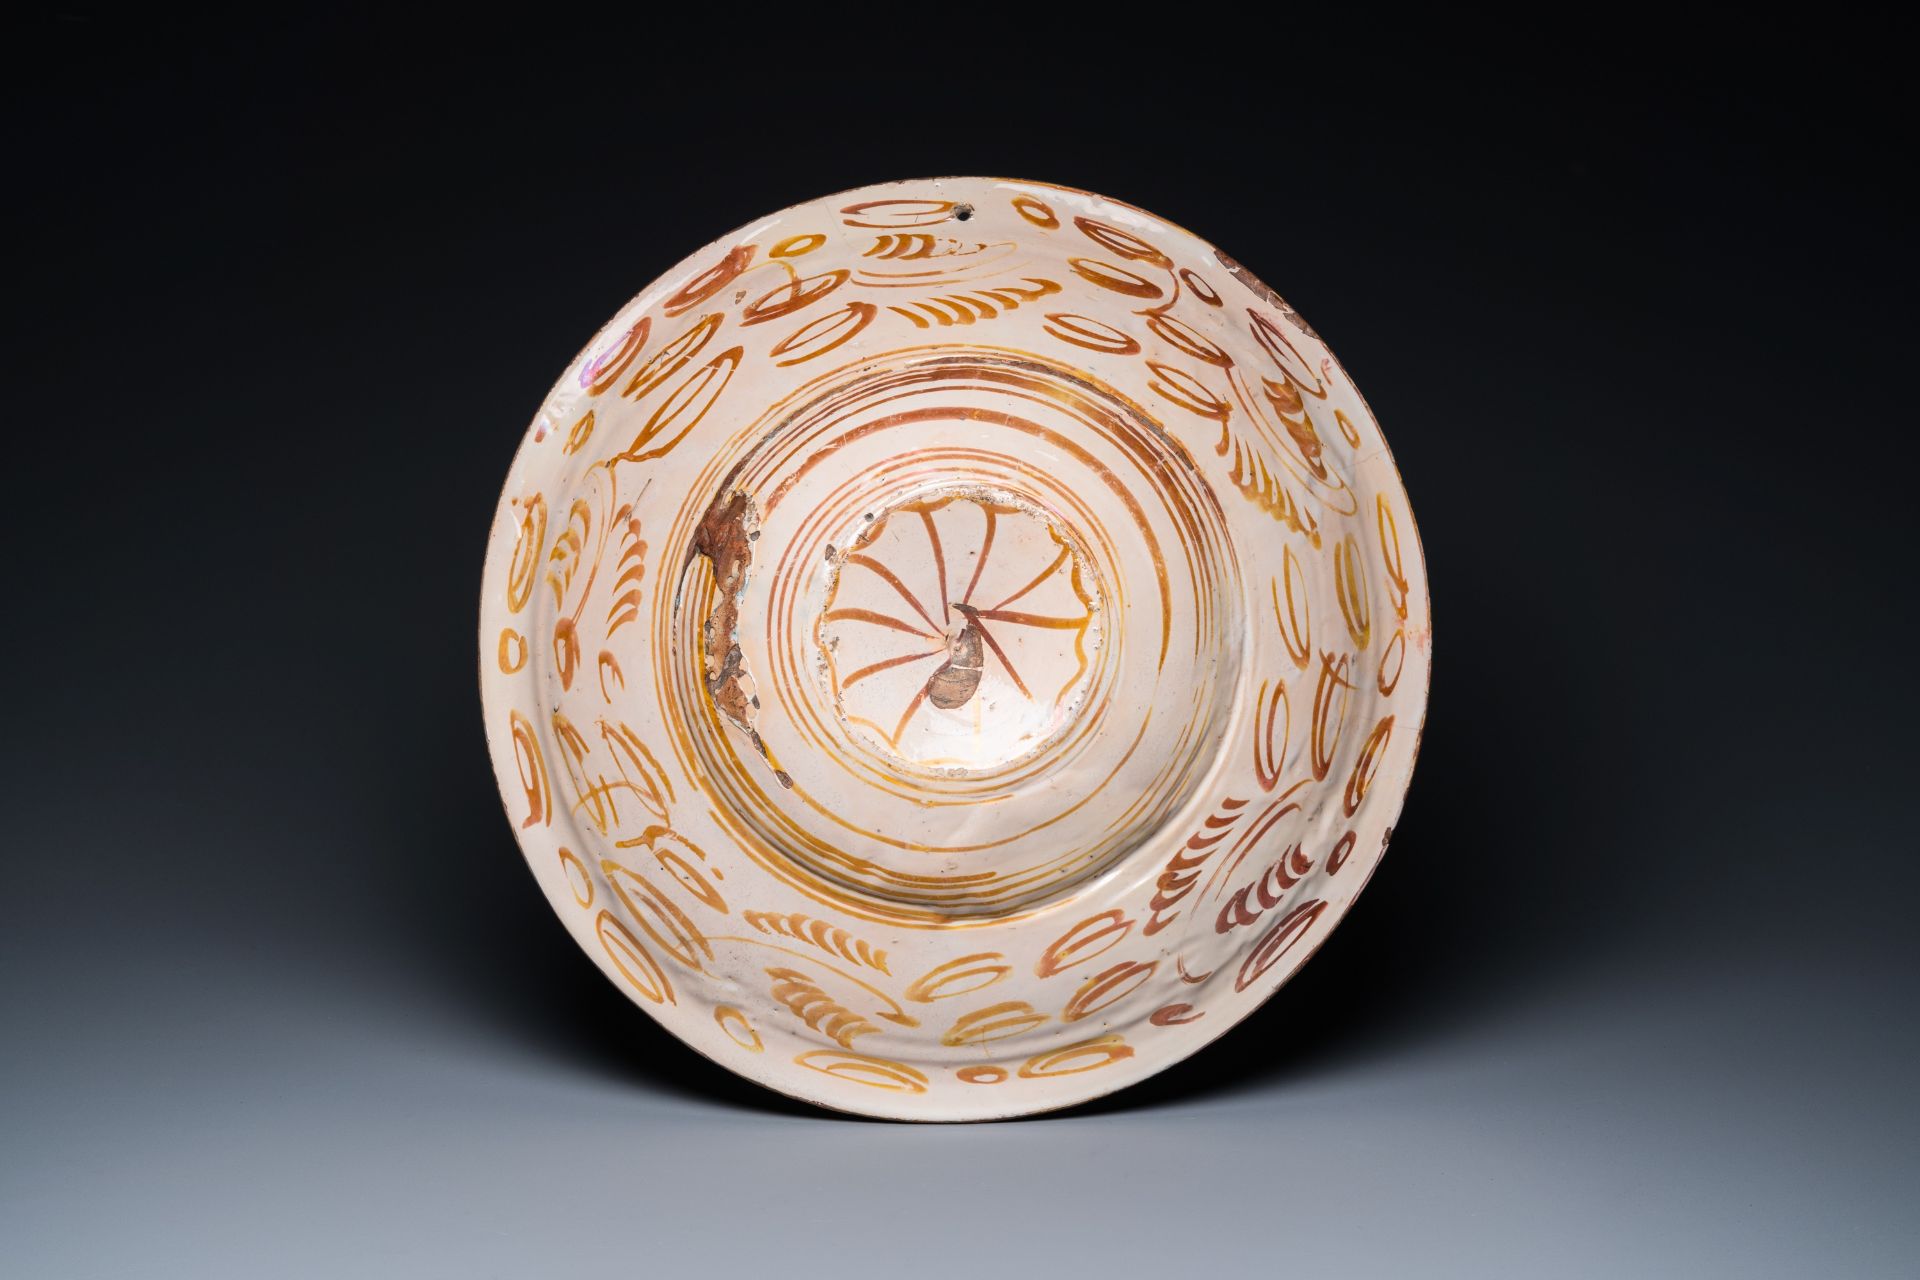 A very fresh large Hispano-Moresque lustre-glazed dish with ornamental design, Spain, 16th C. - Image 2 of 2